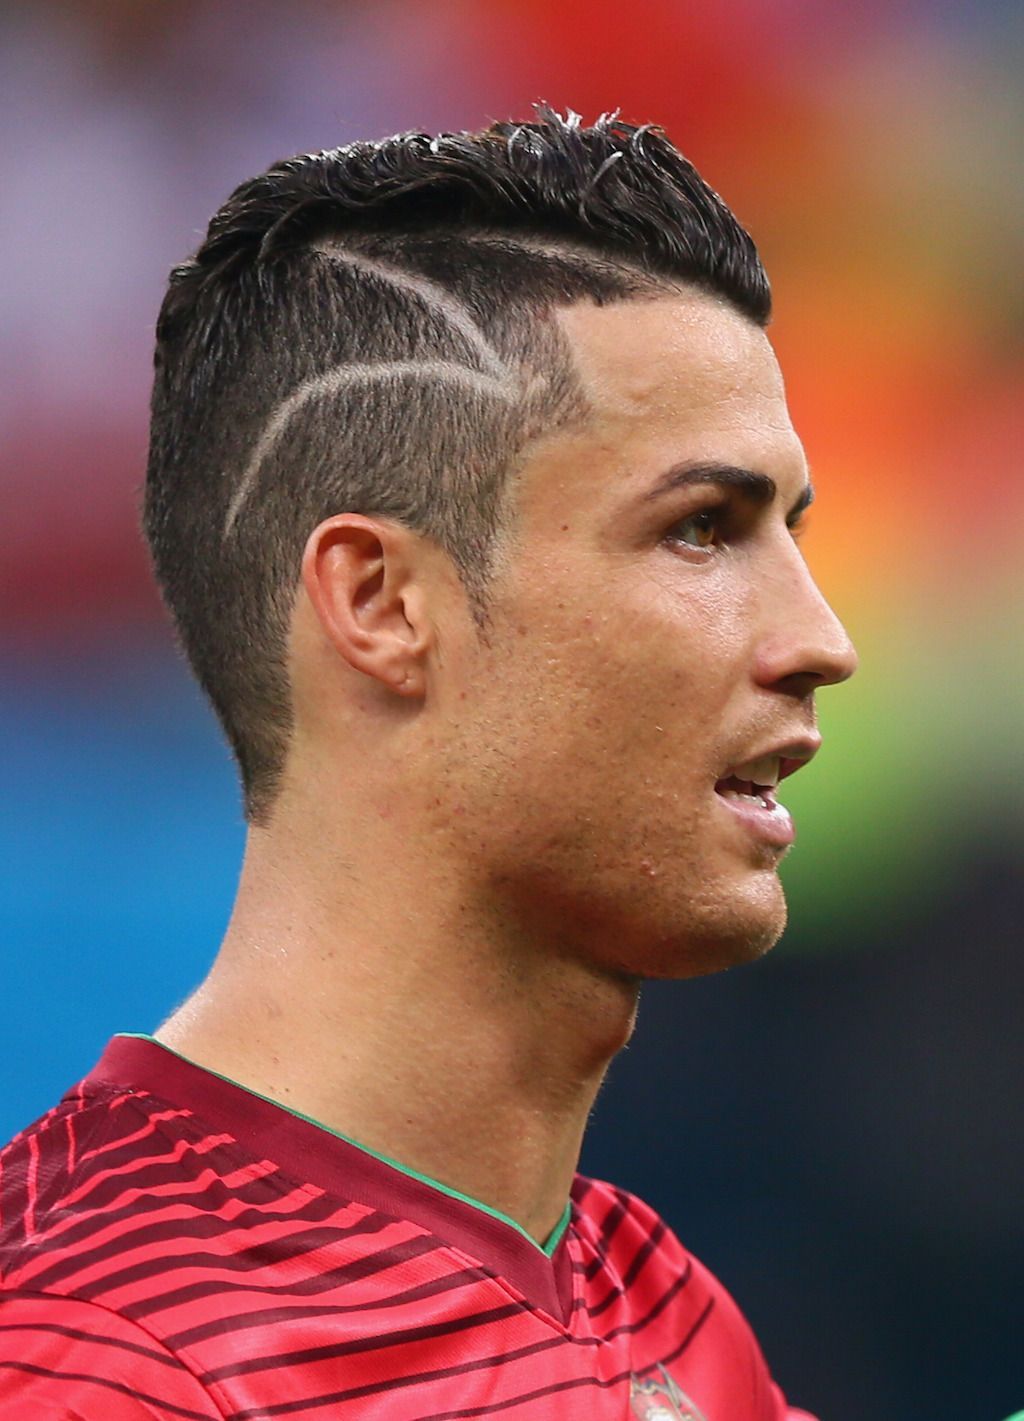 Ronaldo Hairstyle Wallpapers - Wallpaper Cave